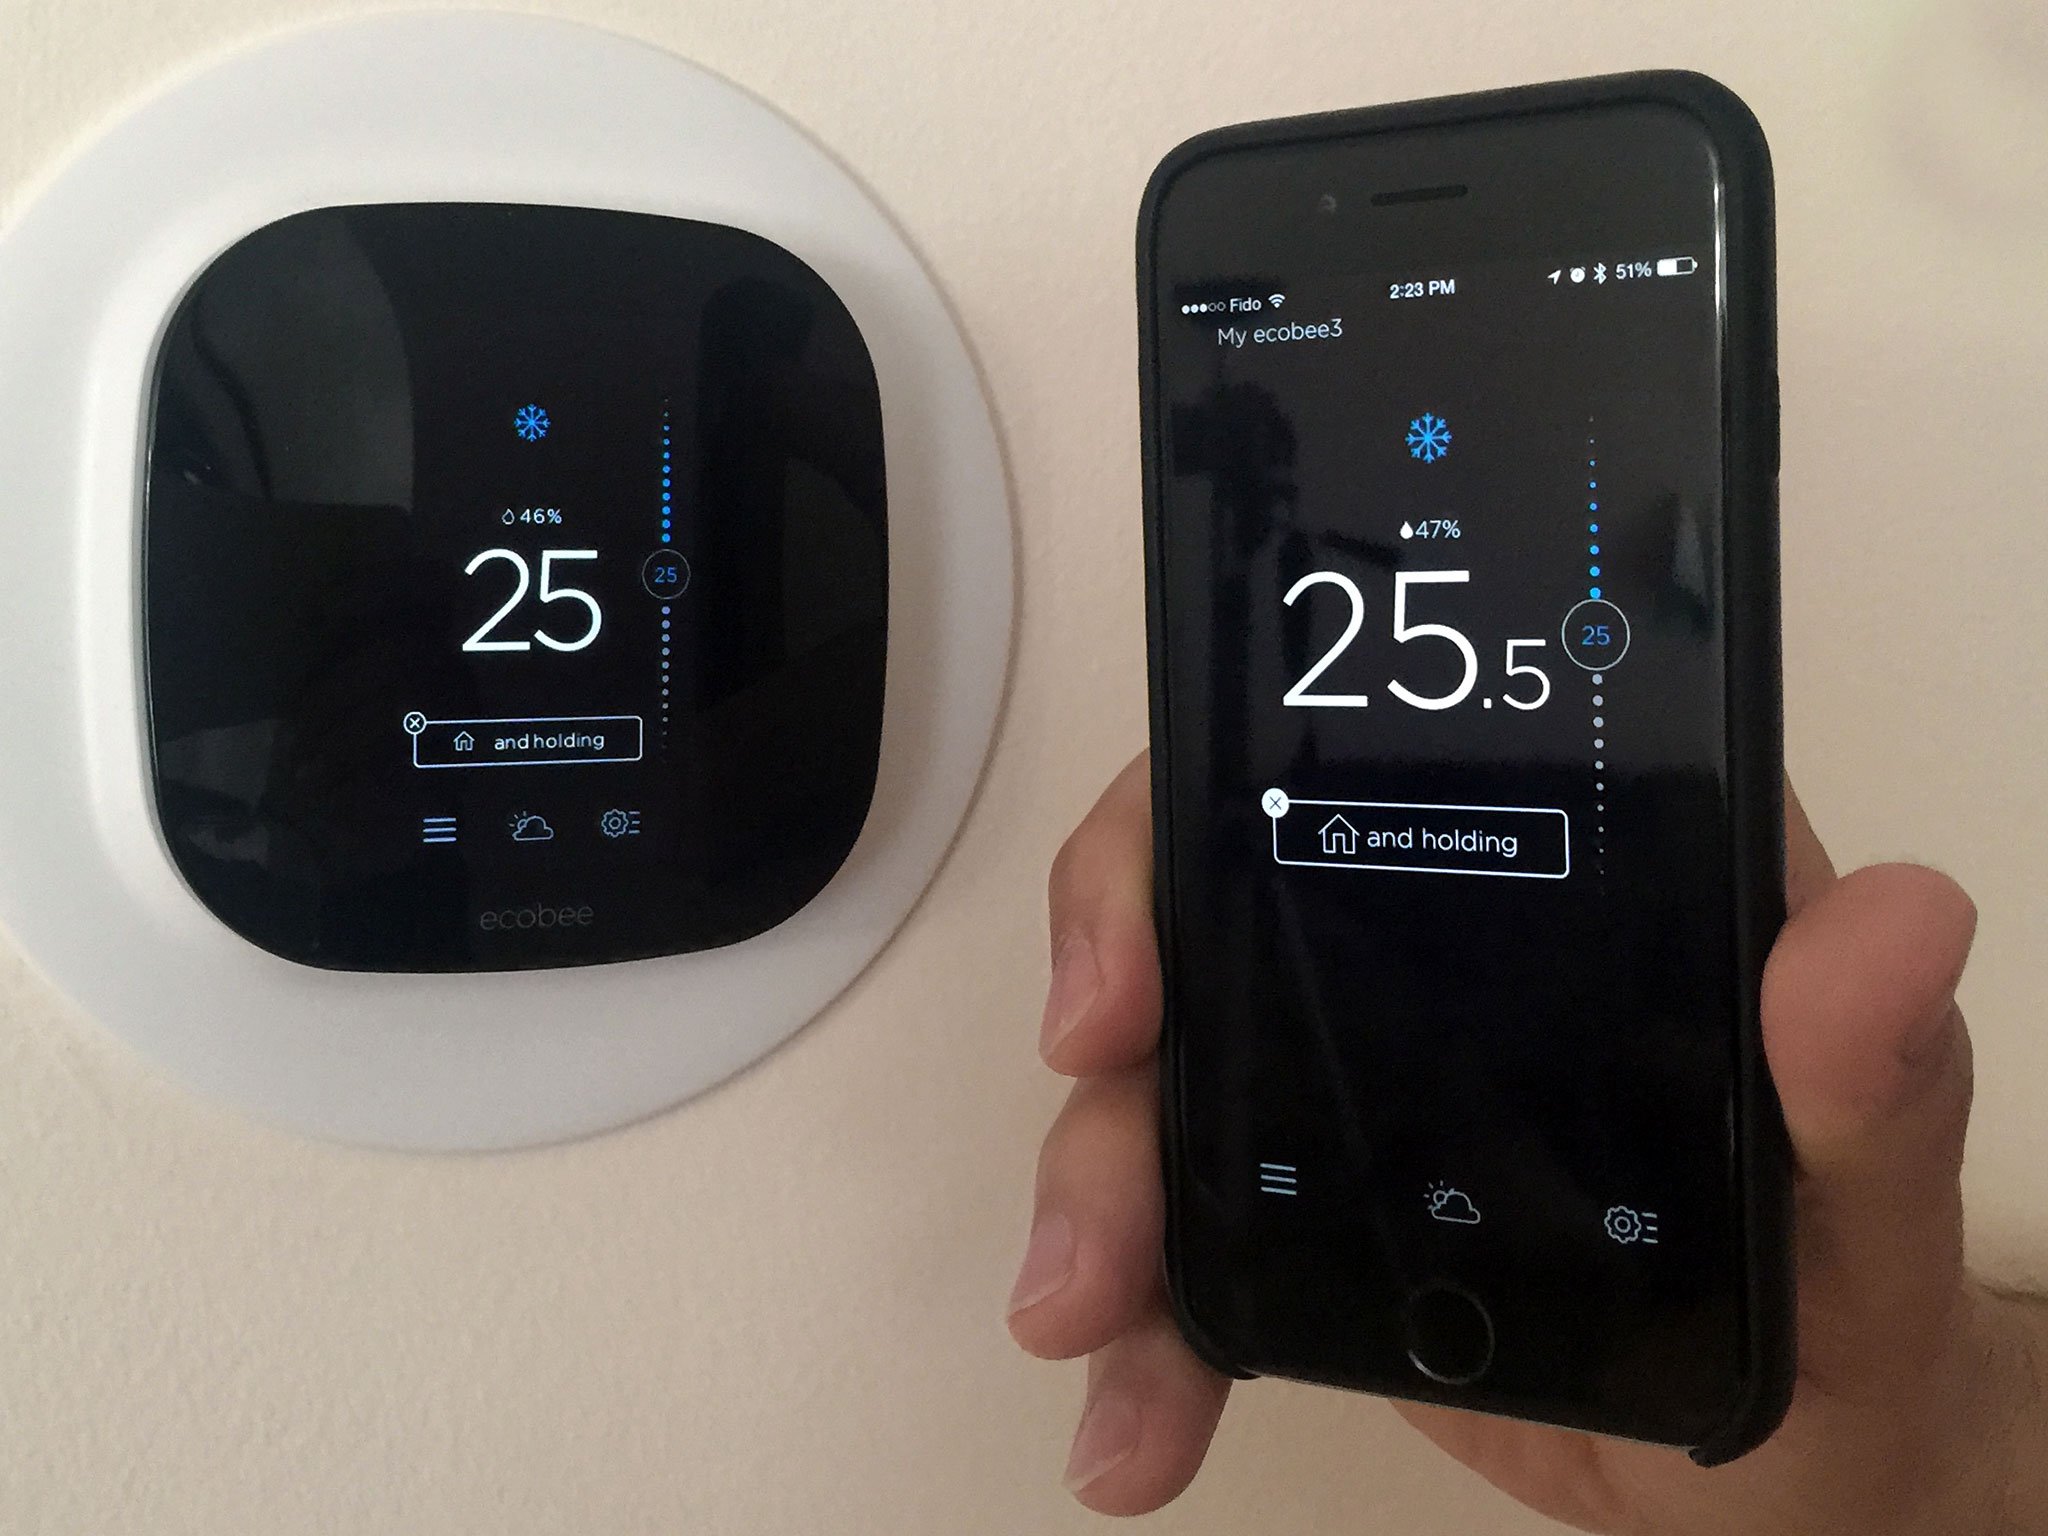 How to use the Ecobee3 smart thermostat with your iPhone